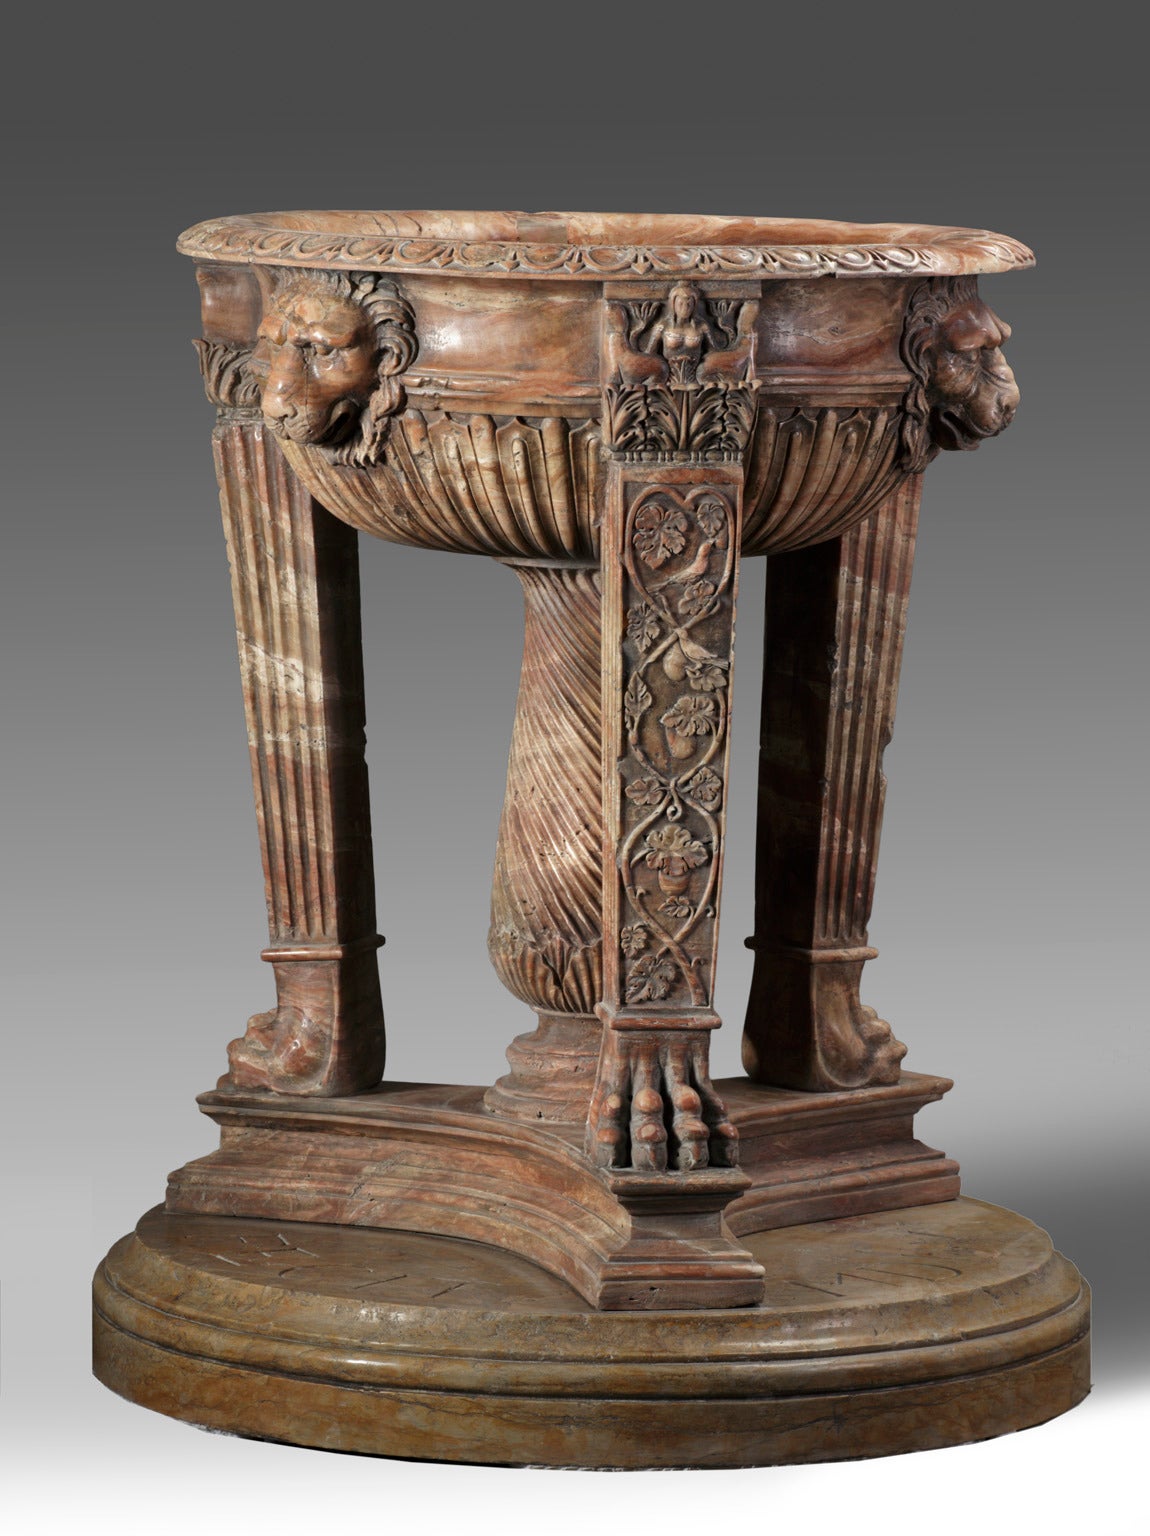 The basin with everted rim above a waisted band with three lion's masks carved in relief, with fluted underside, held on three rectangular section fluted and foliate cast legs with paw feet, around a central spiral carved baluster supporting column,